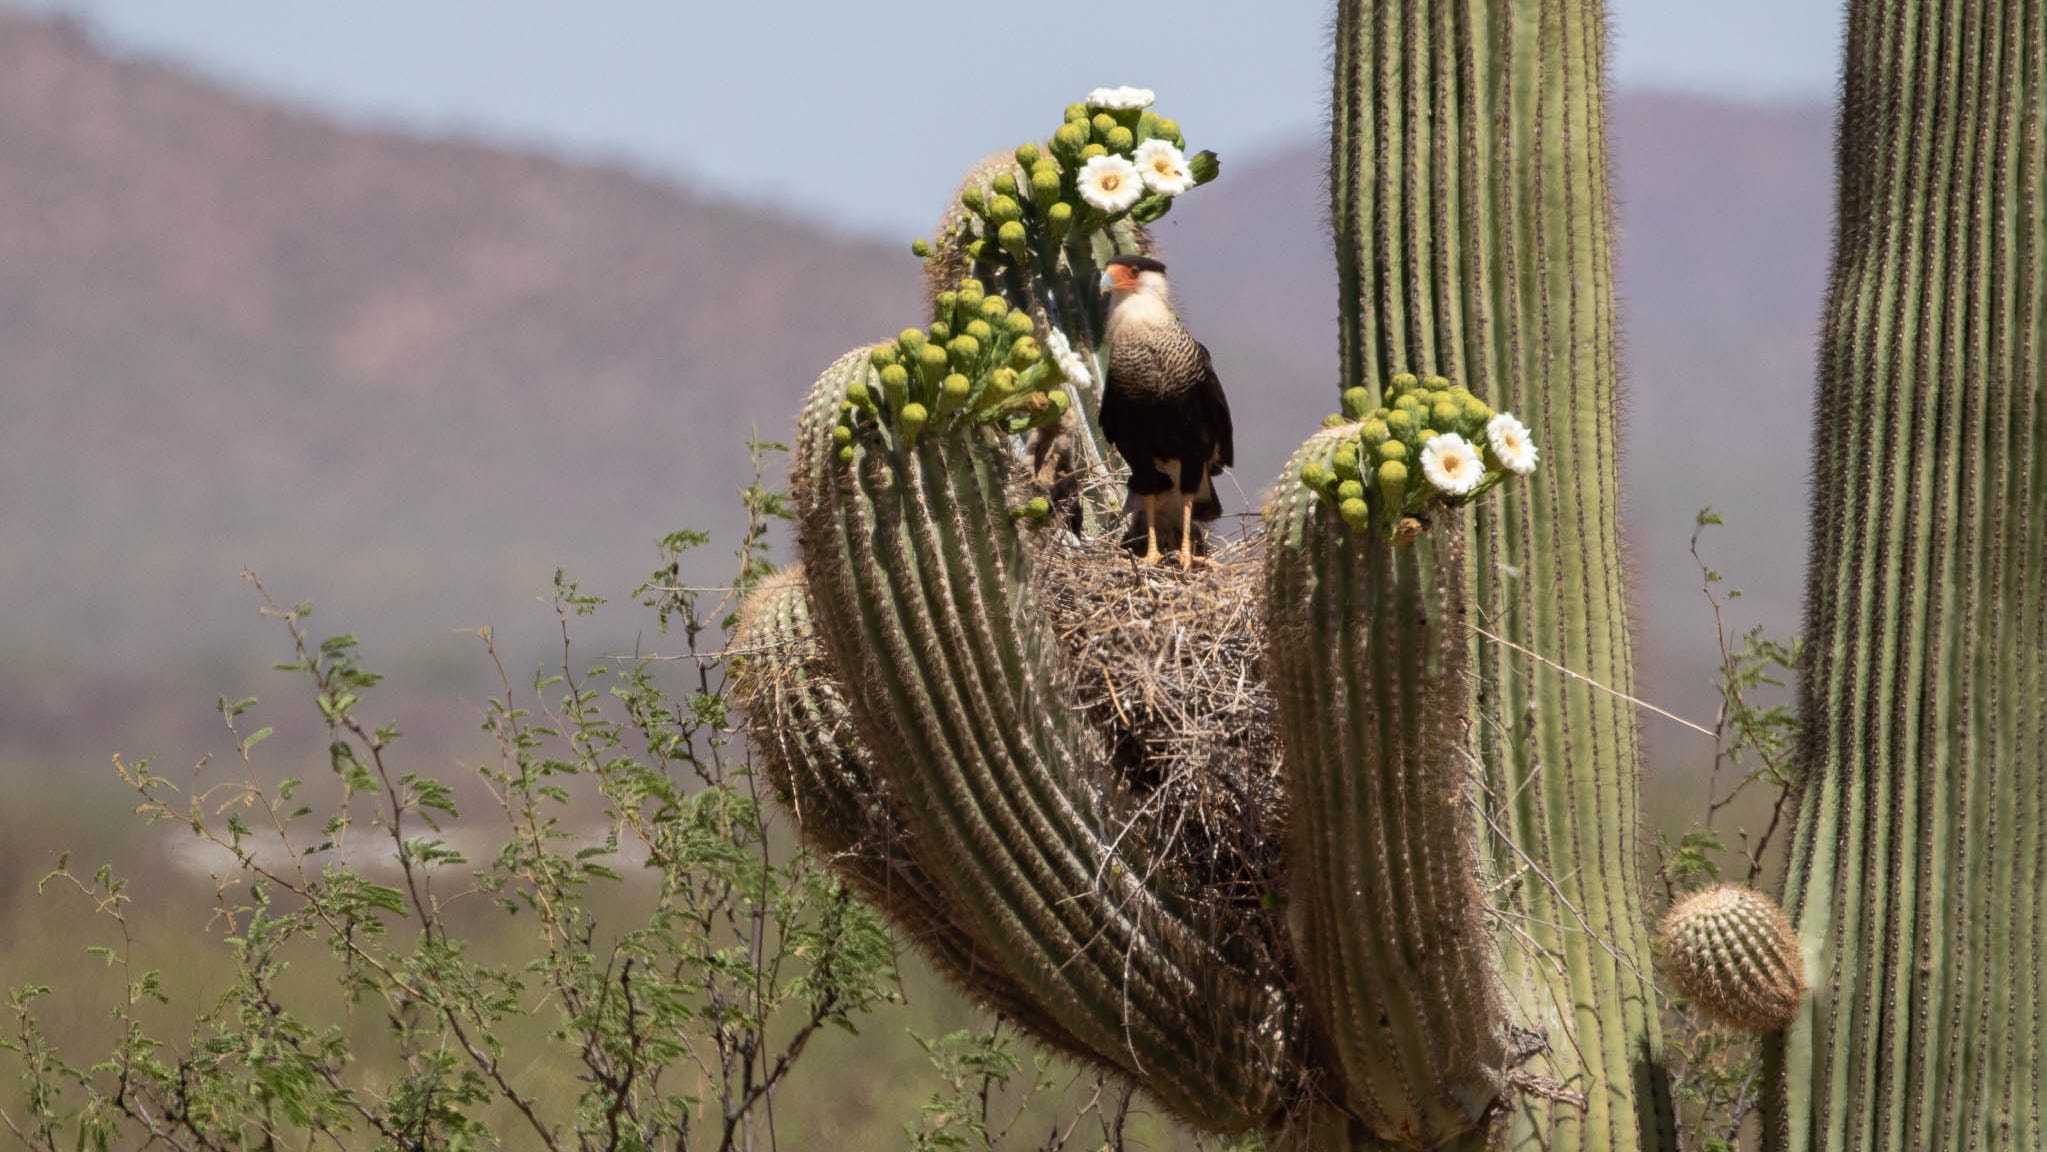 Replanting cacti, Muscogean heritage: News from around our 50 states